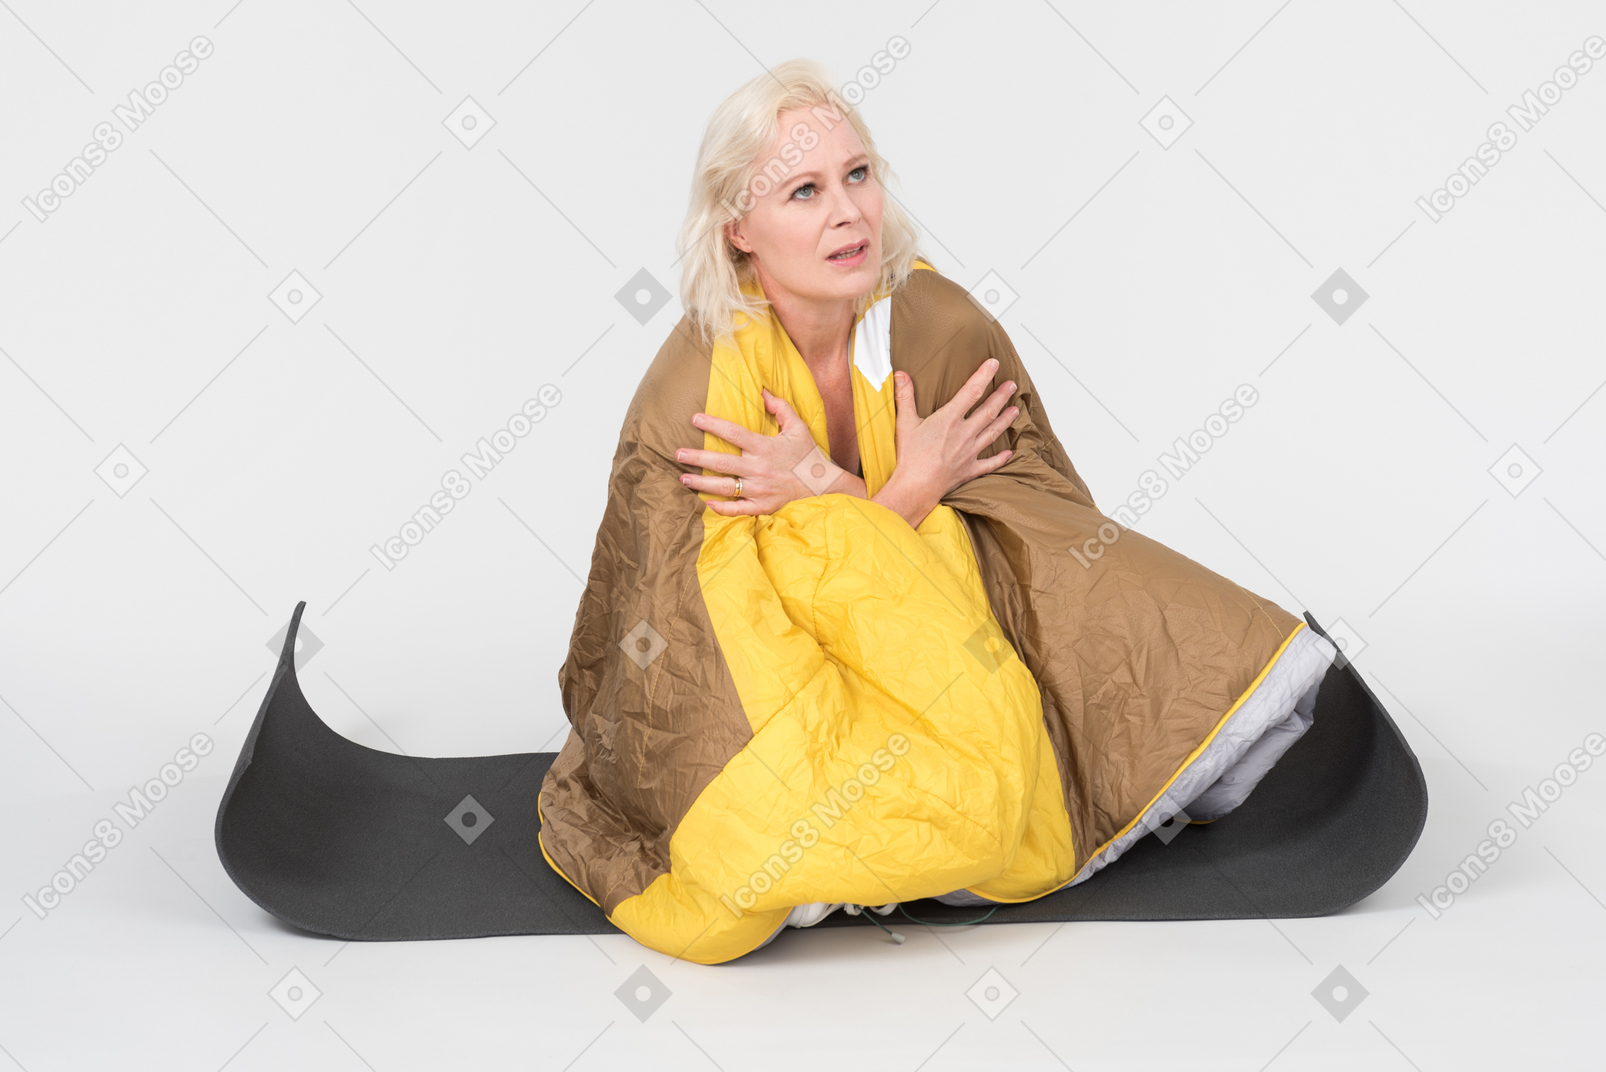 Mature woman sitting on yoga mat wrapped in blanket